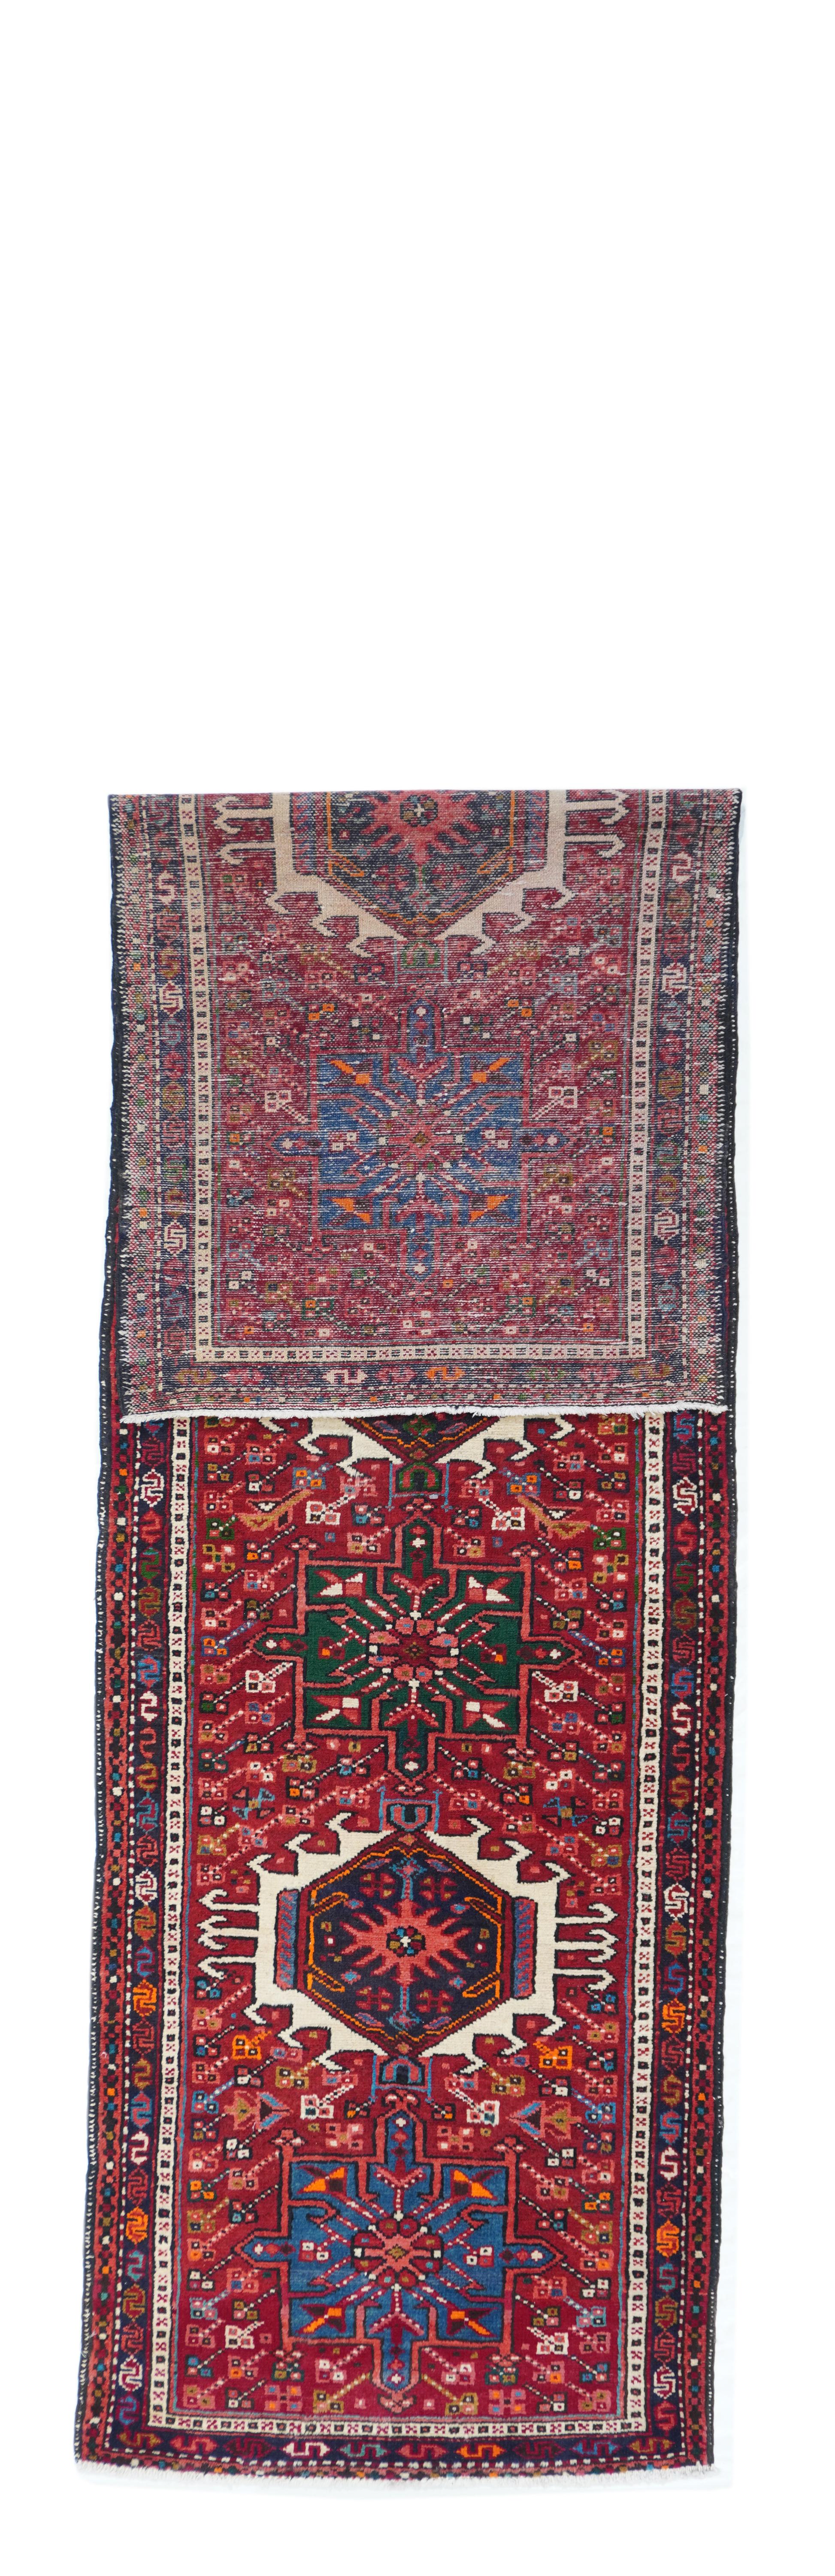 Vintage Karajeh Heriz Runner¬†2'8'' x 9'6''. This characteristic NW Persian rustic runner shows seven alternating octogramme and hooked hexagon medallions in abrashed light blue, medium blue, dark green and ecru. Tomato red field with radiating